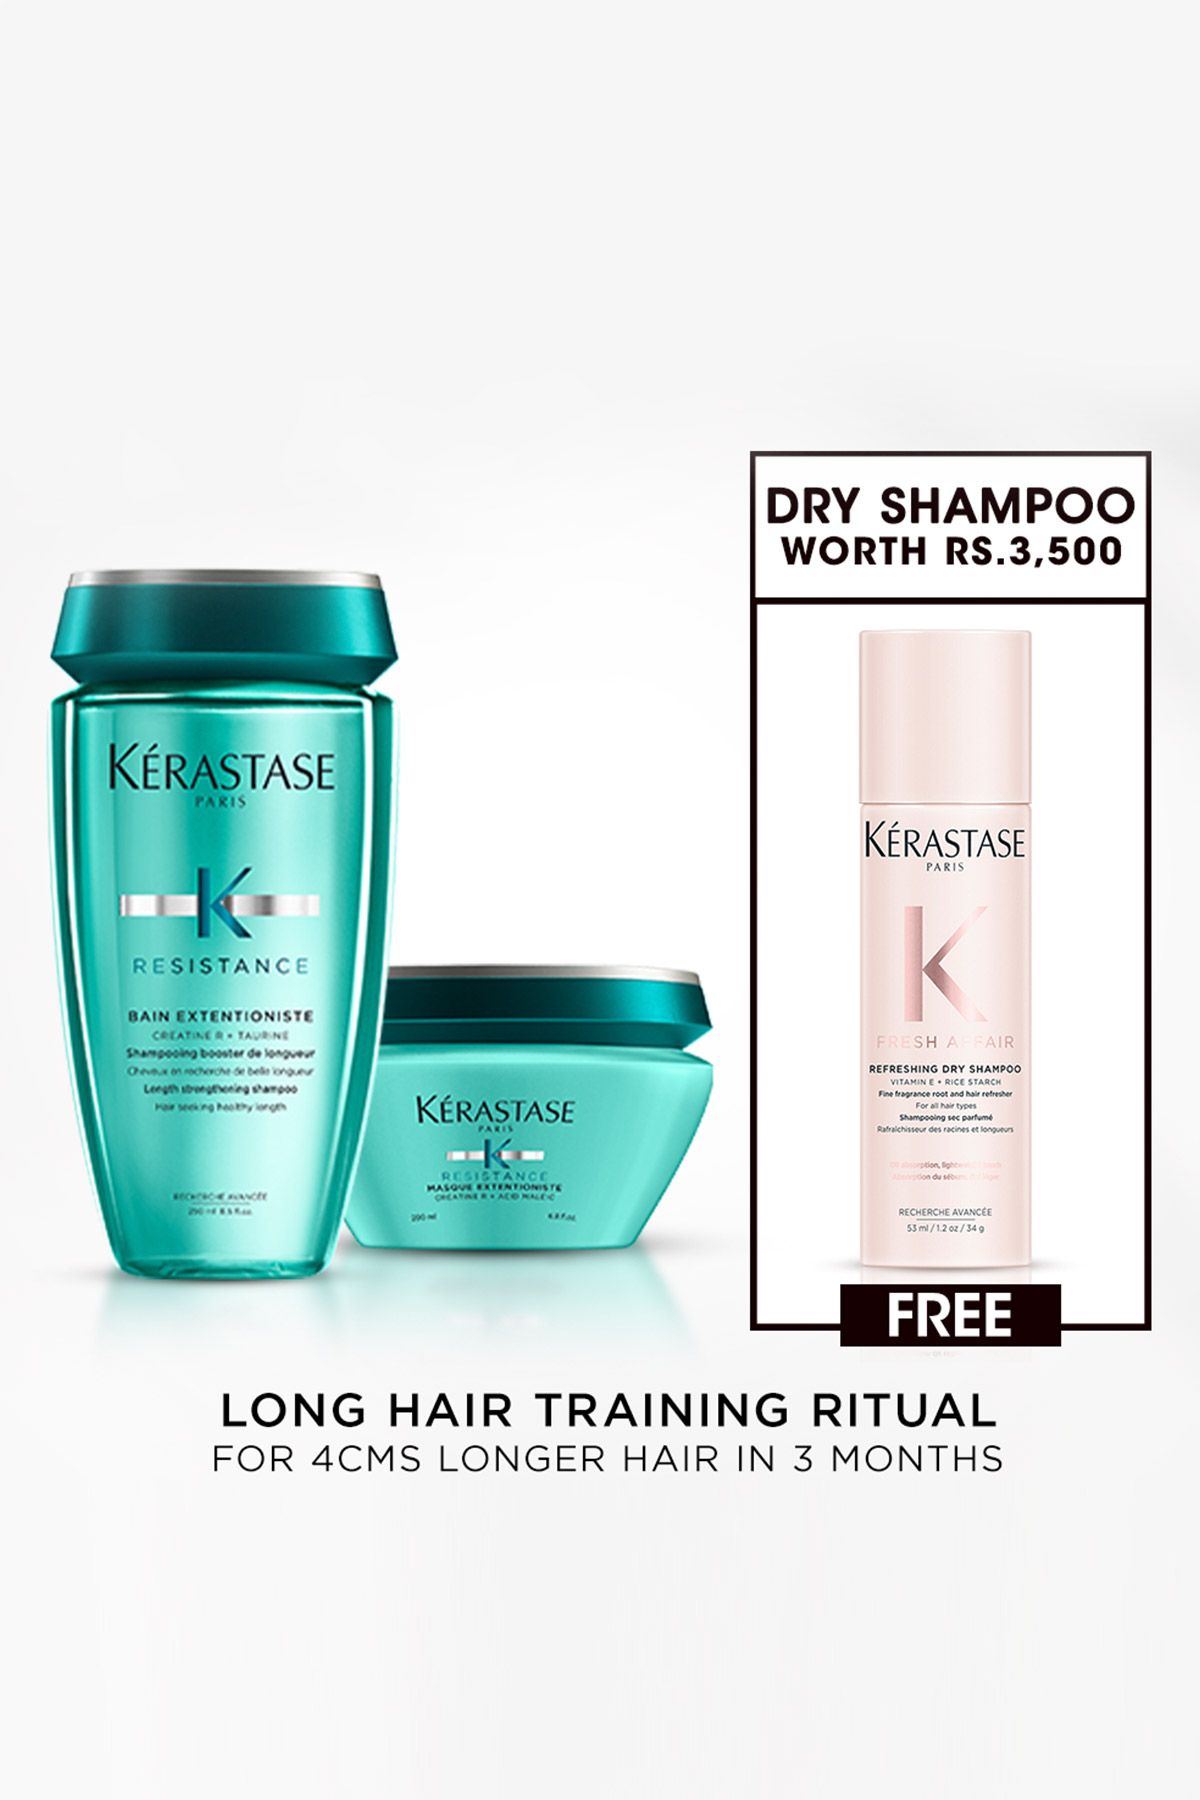 For Long Hair - Extentioniste Shampoo & Mask with Free Dry Shampoo